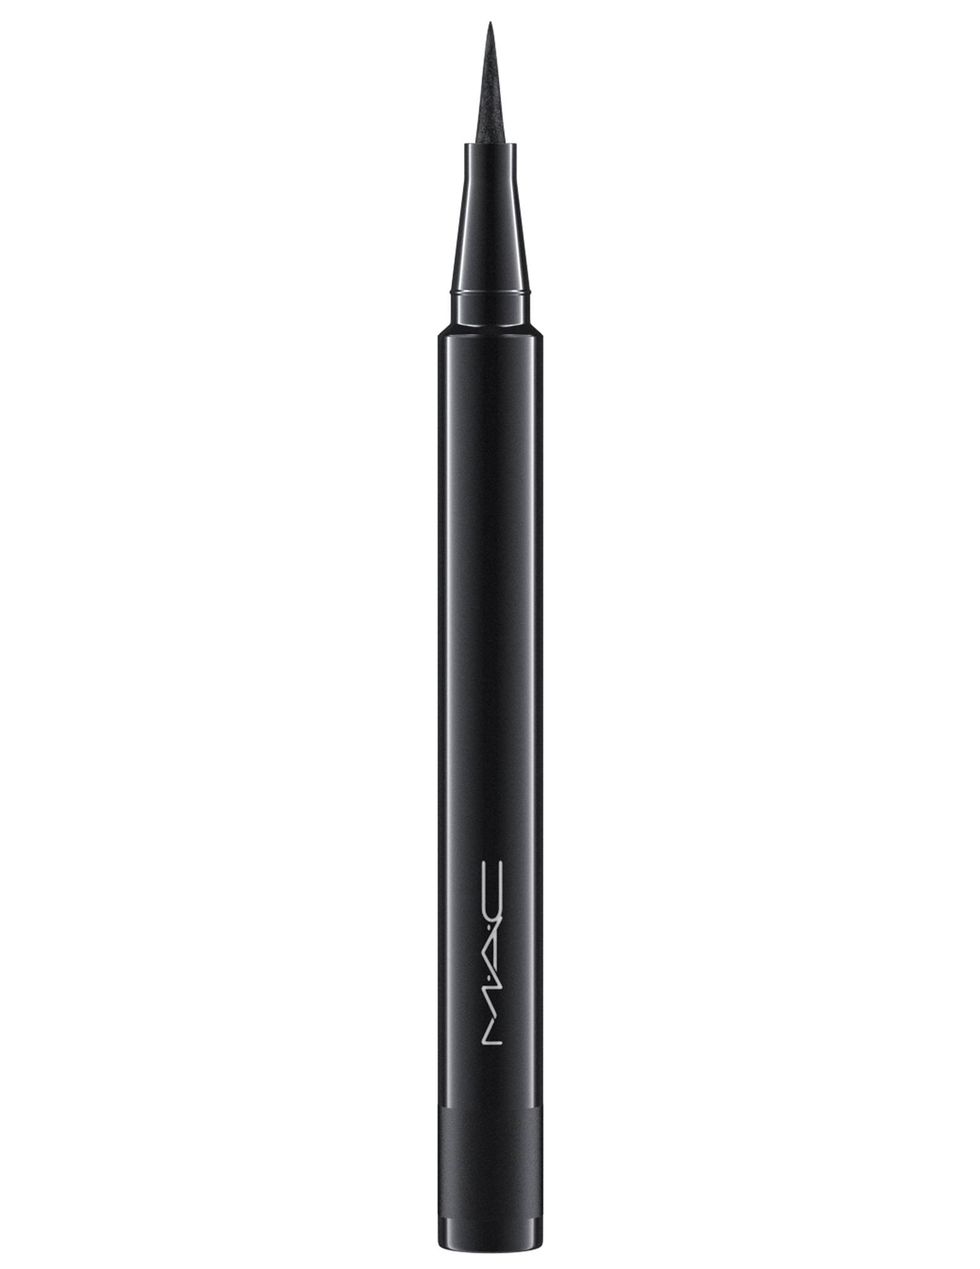 Black, Grey, Writing implement, Black-and-white, Silver, Stationery, Pen, Cylinder, Cosmetics, 